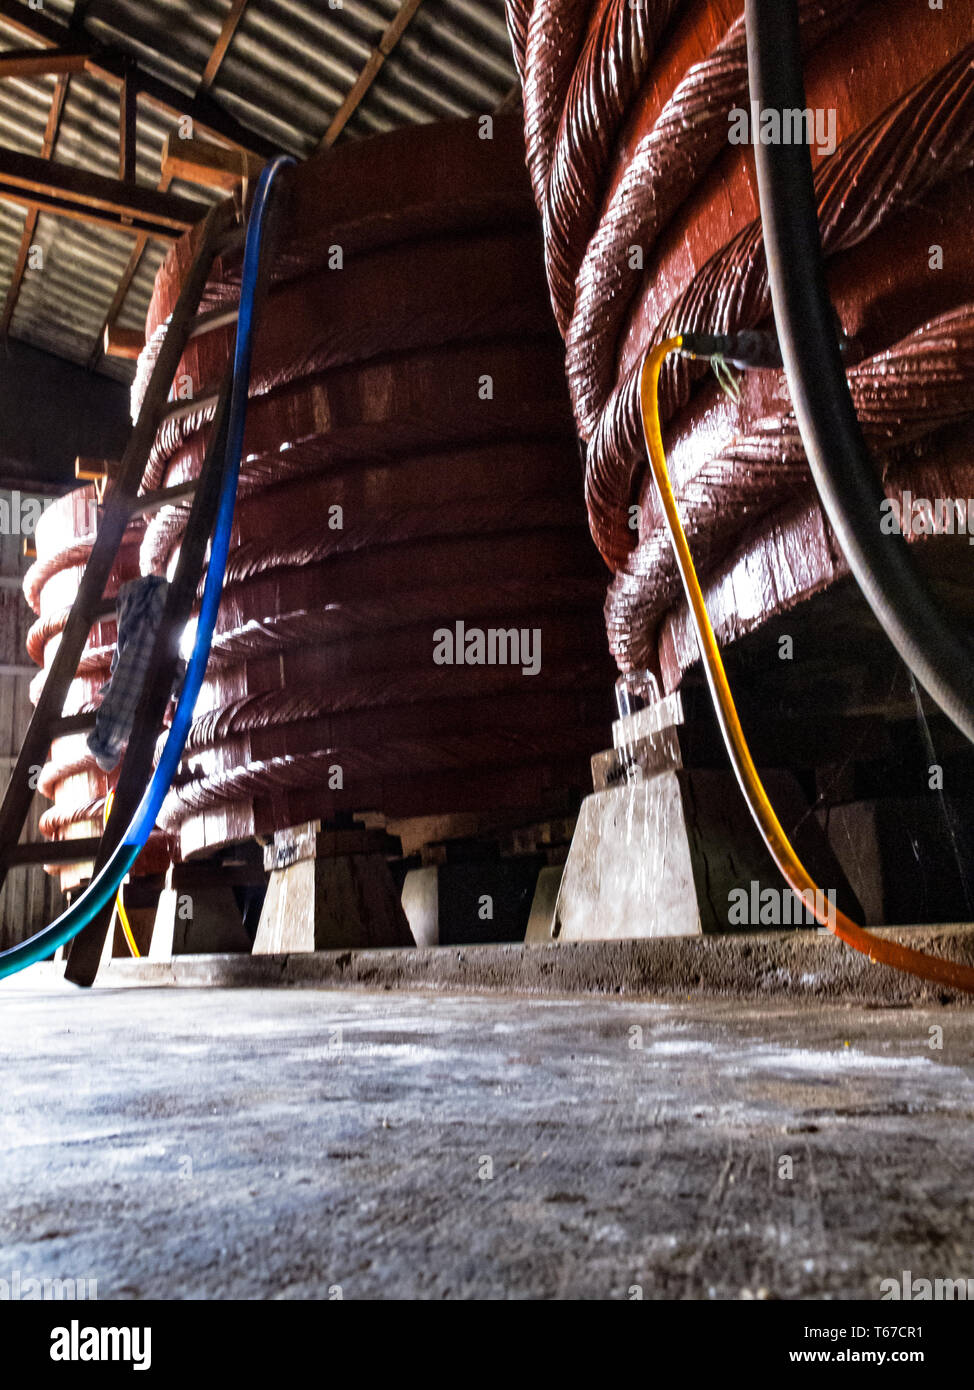 Closeup of processing plant barrels of fish sauce fermenting a year with hoses attached Stock Photo